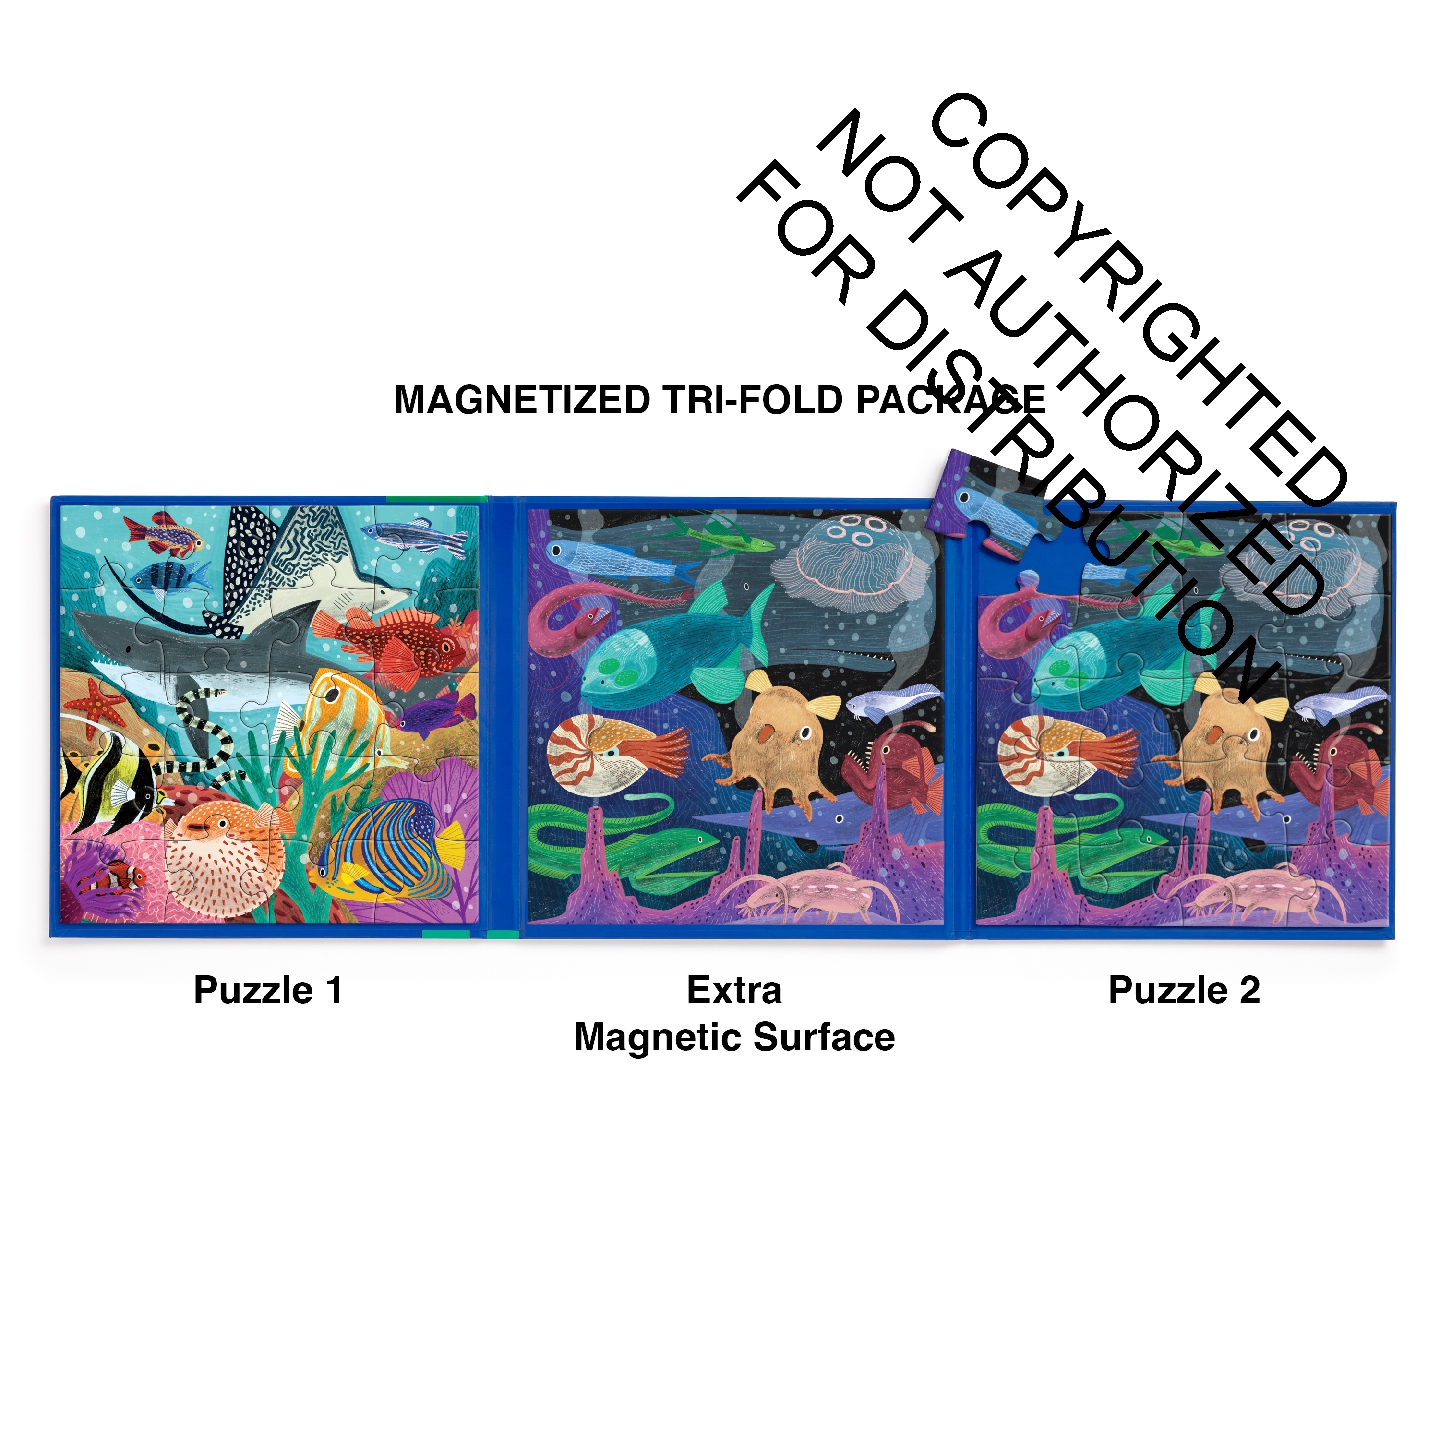 Depths of the Seas Magnetic Puzzle